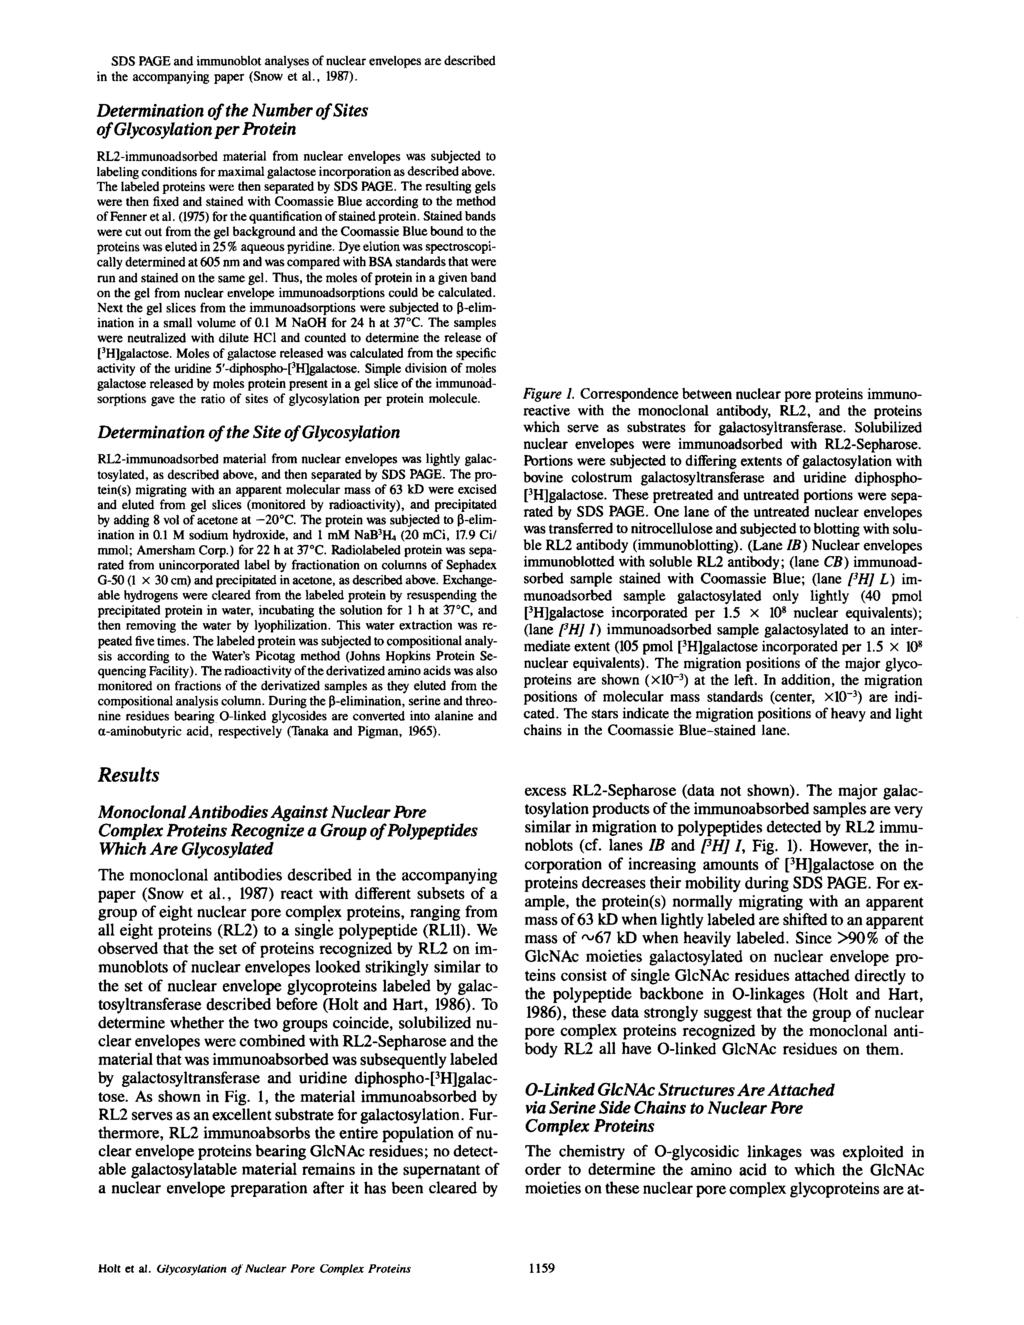 SDS PAGE and immunoblot analyses of nuclear envelopes are described in the accompanying paper (Snow et al., 1987).